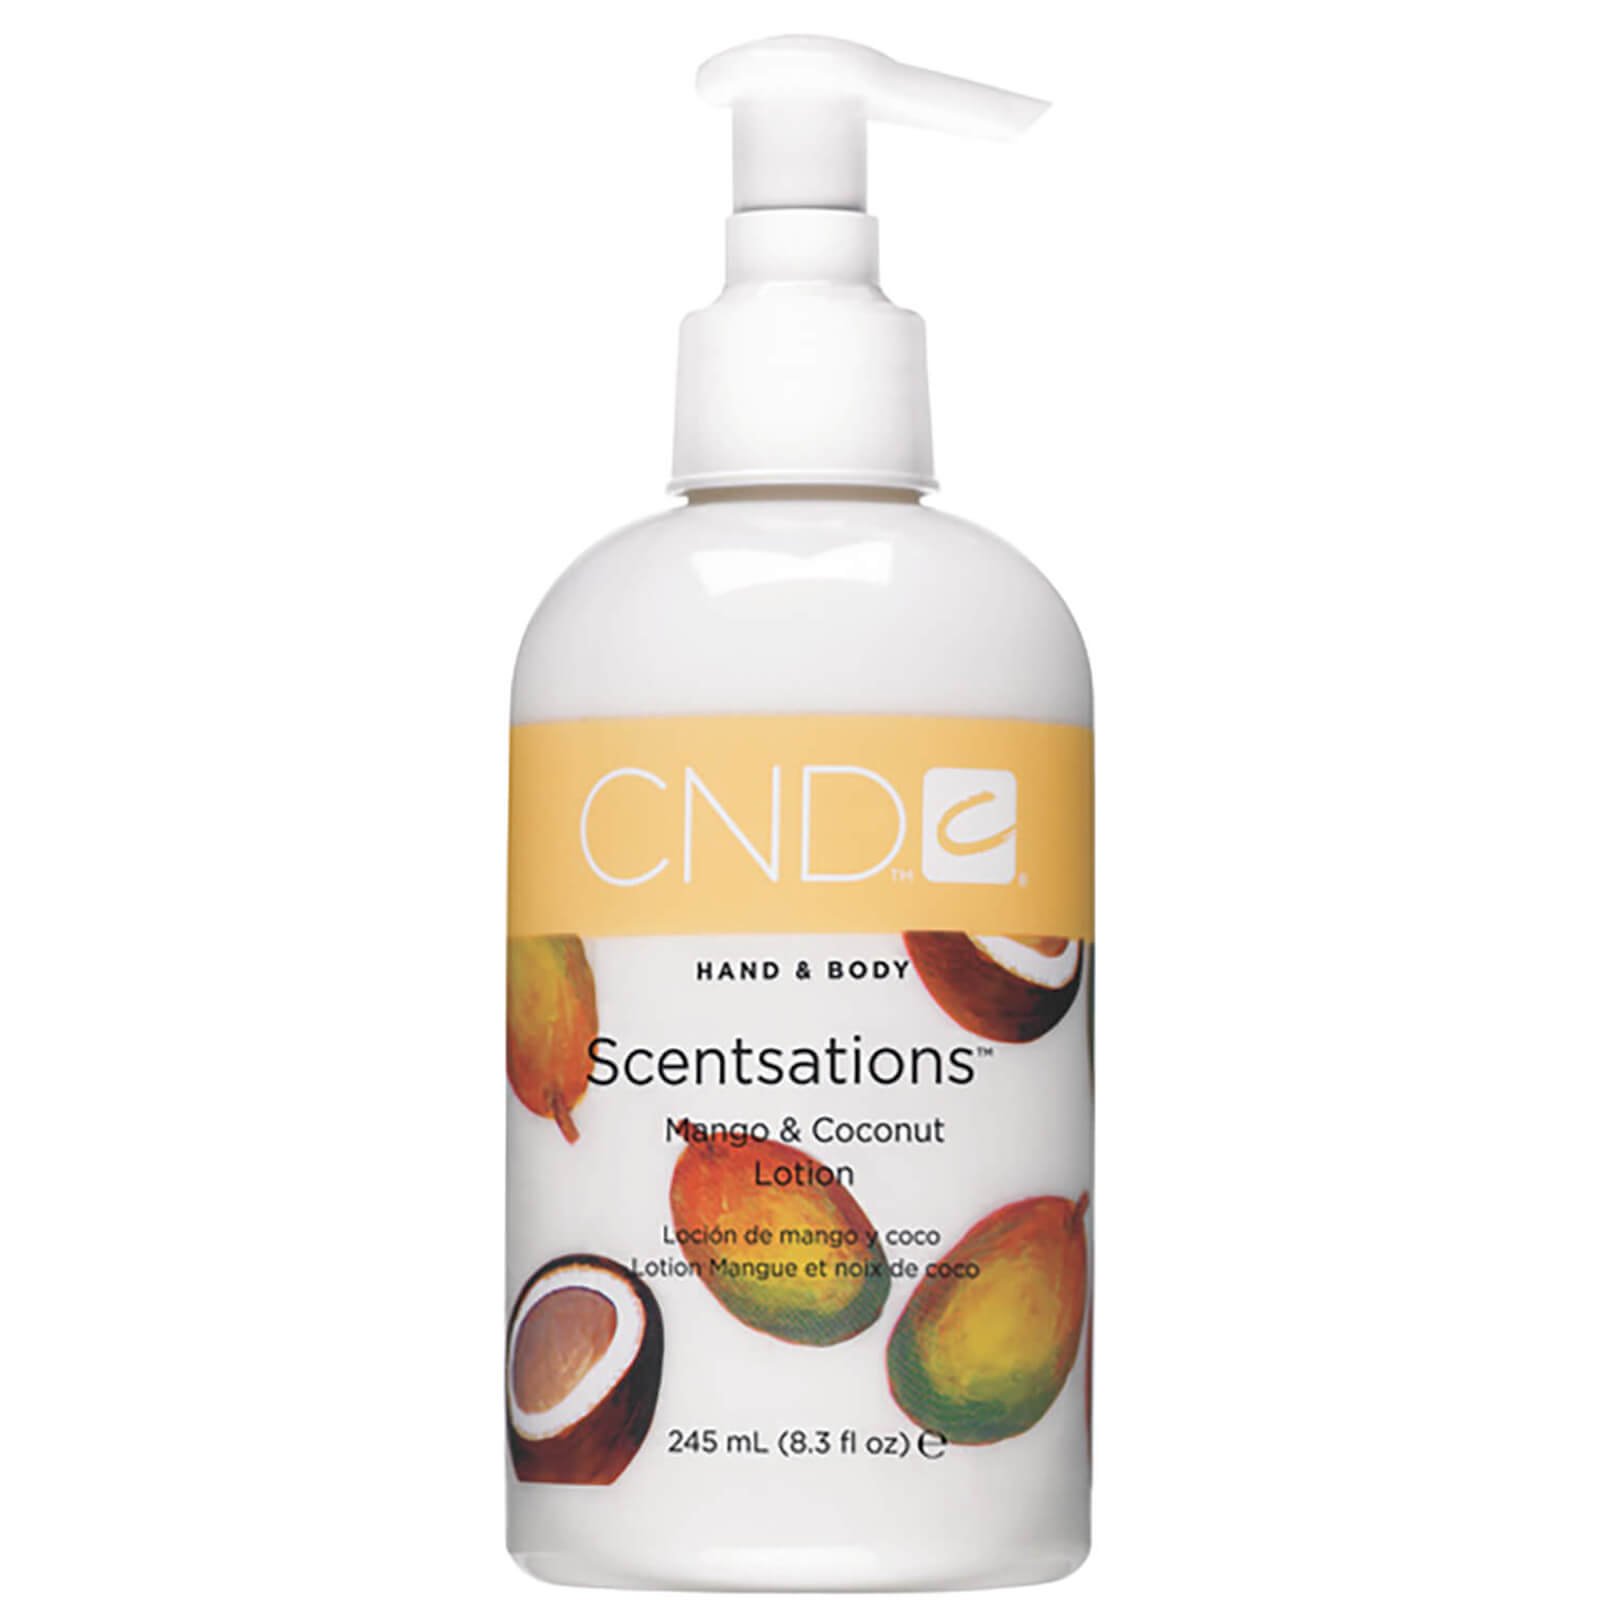 Image of CND Scentsations Mango & Coconut Hand Lotion 245ml